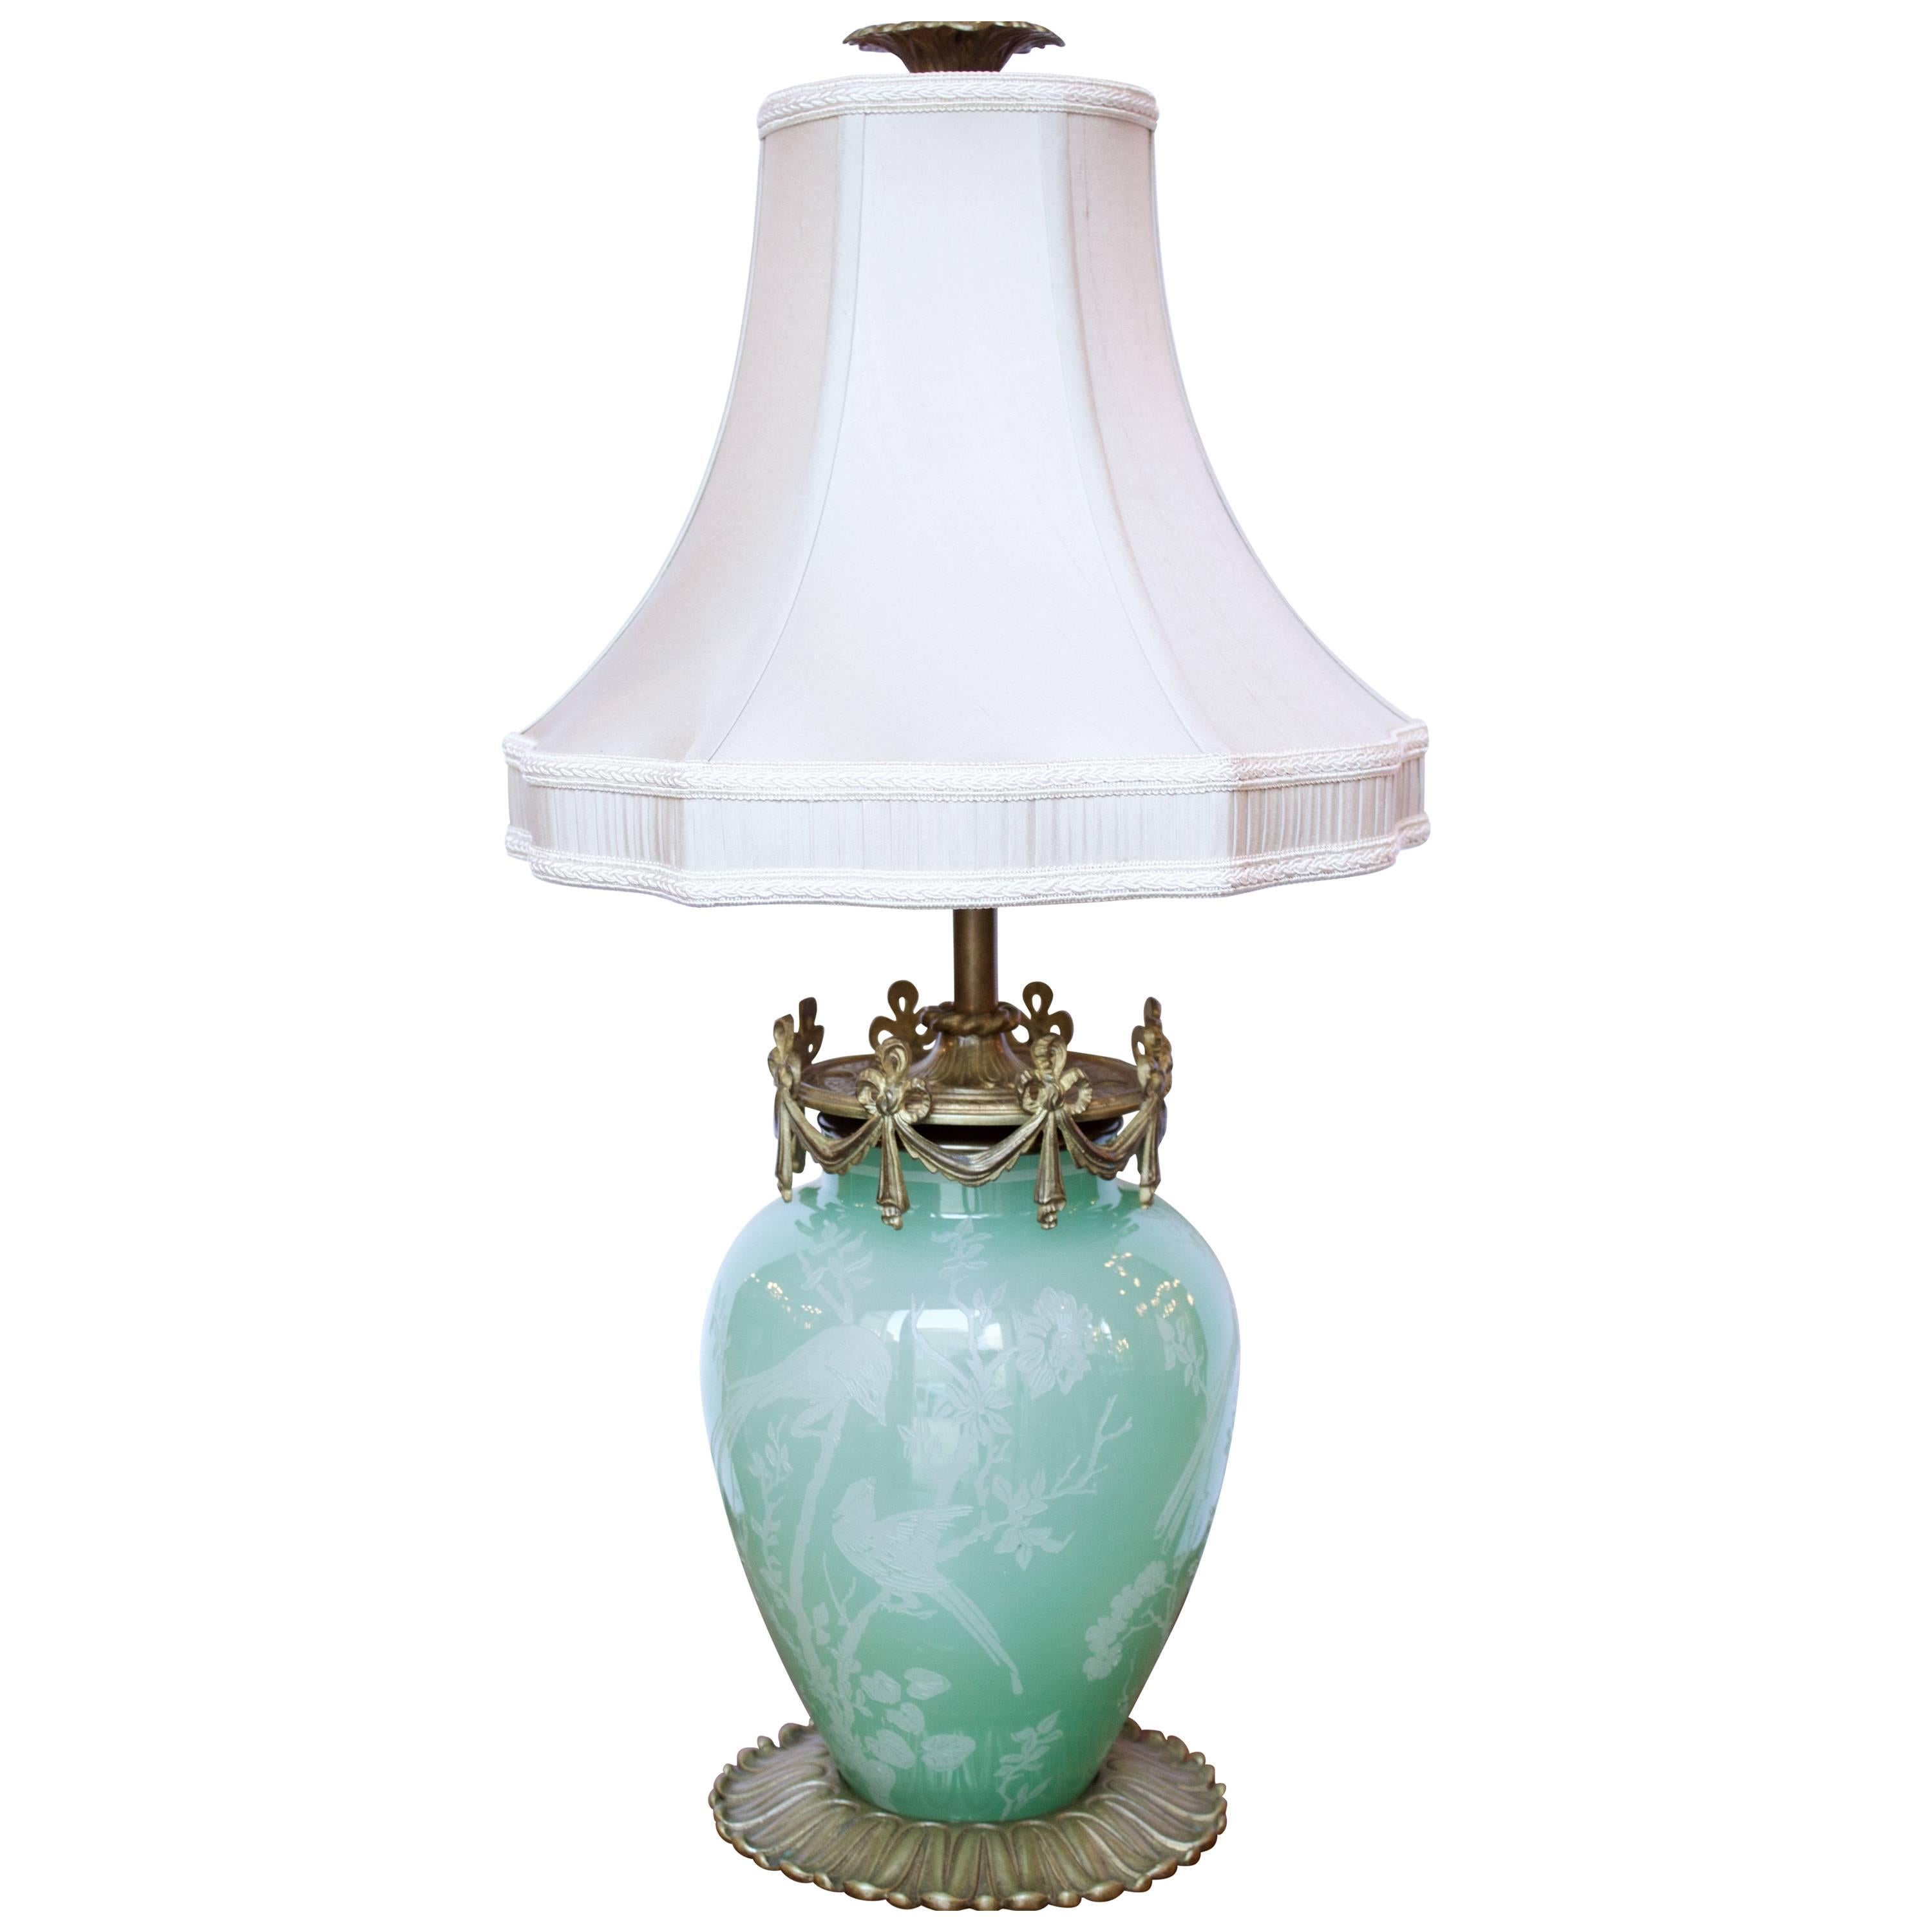 Antique Steuben Glass Lamp by F. Carder For Sale